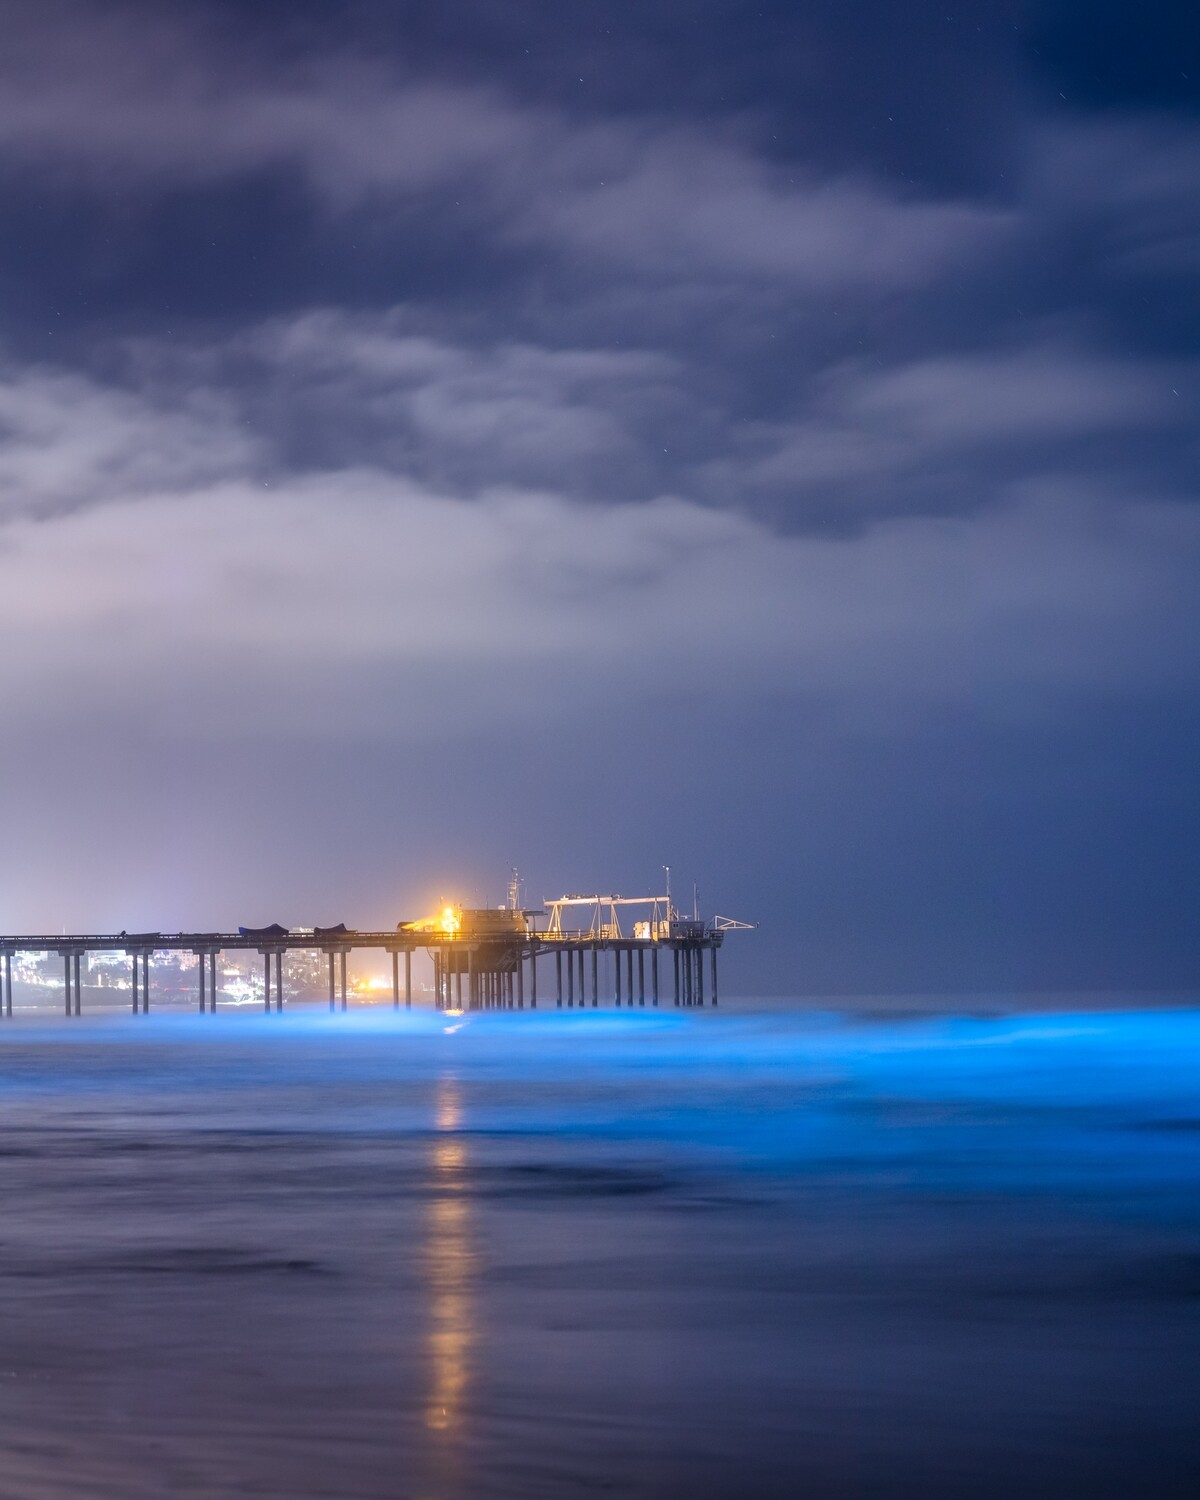 Signed Print | "Bioluminescence under the Pier"